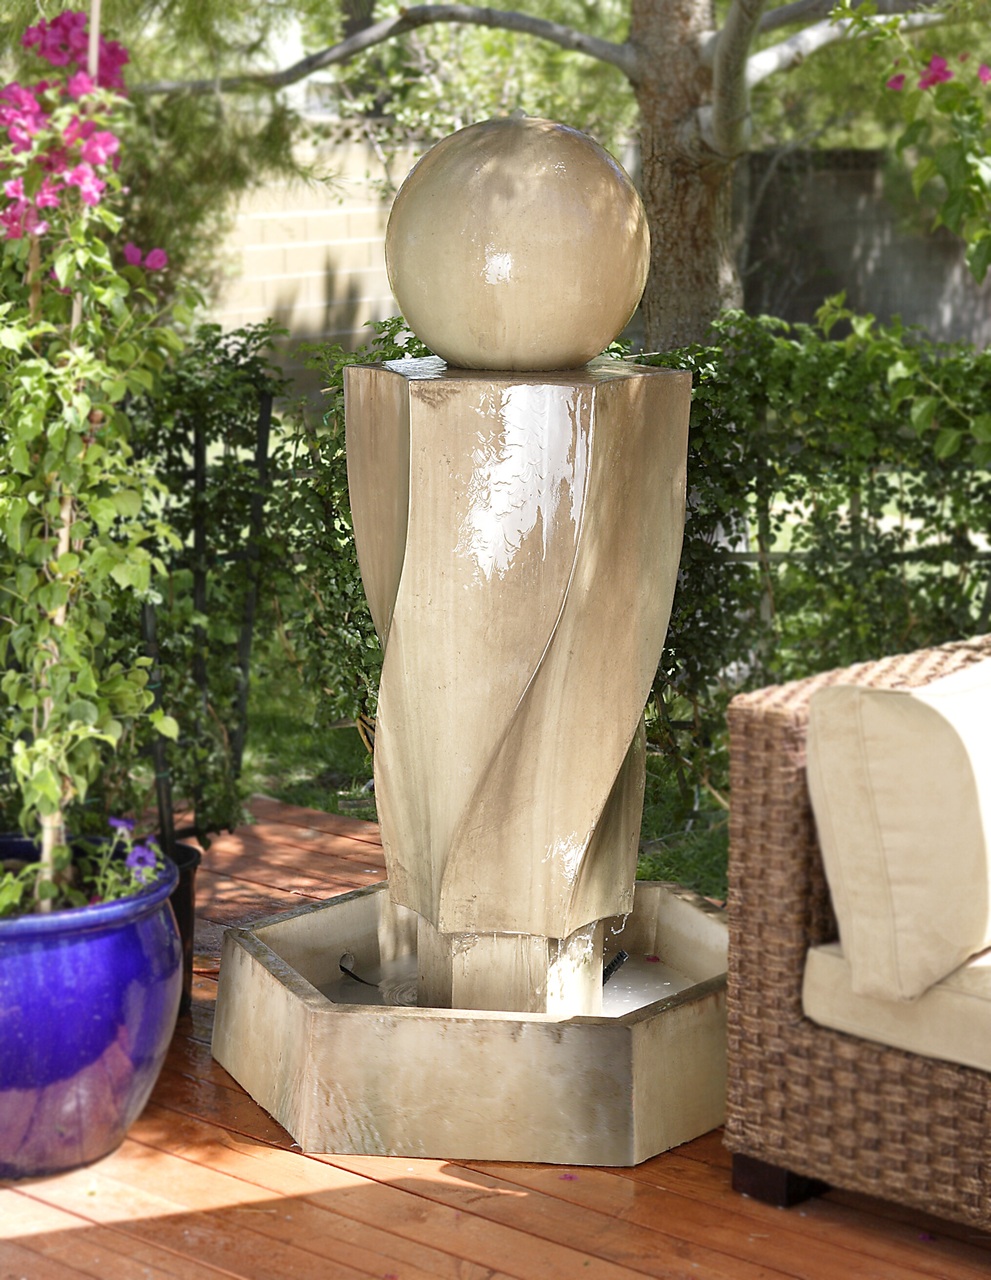 Vortex Fountain with Ball - Unique Water Feature with Ball